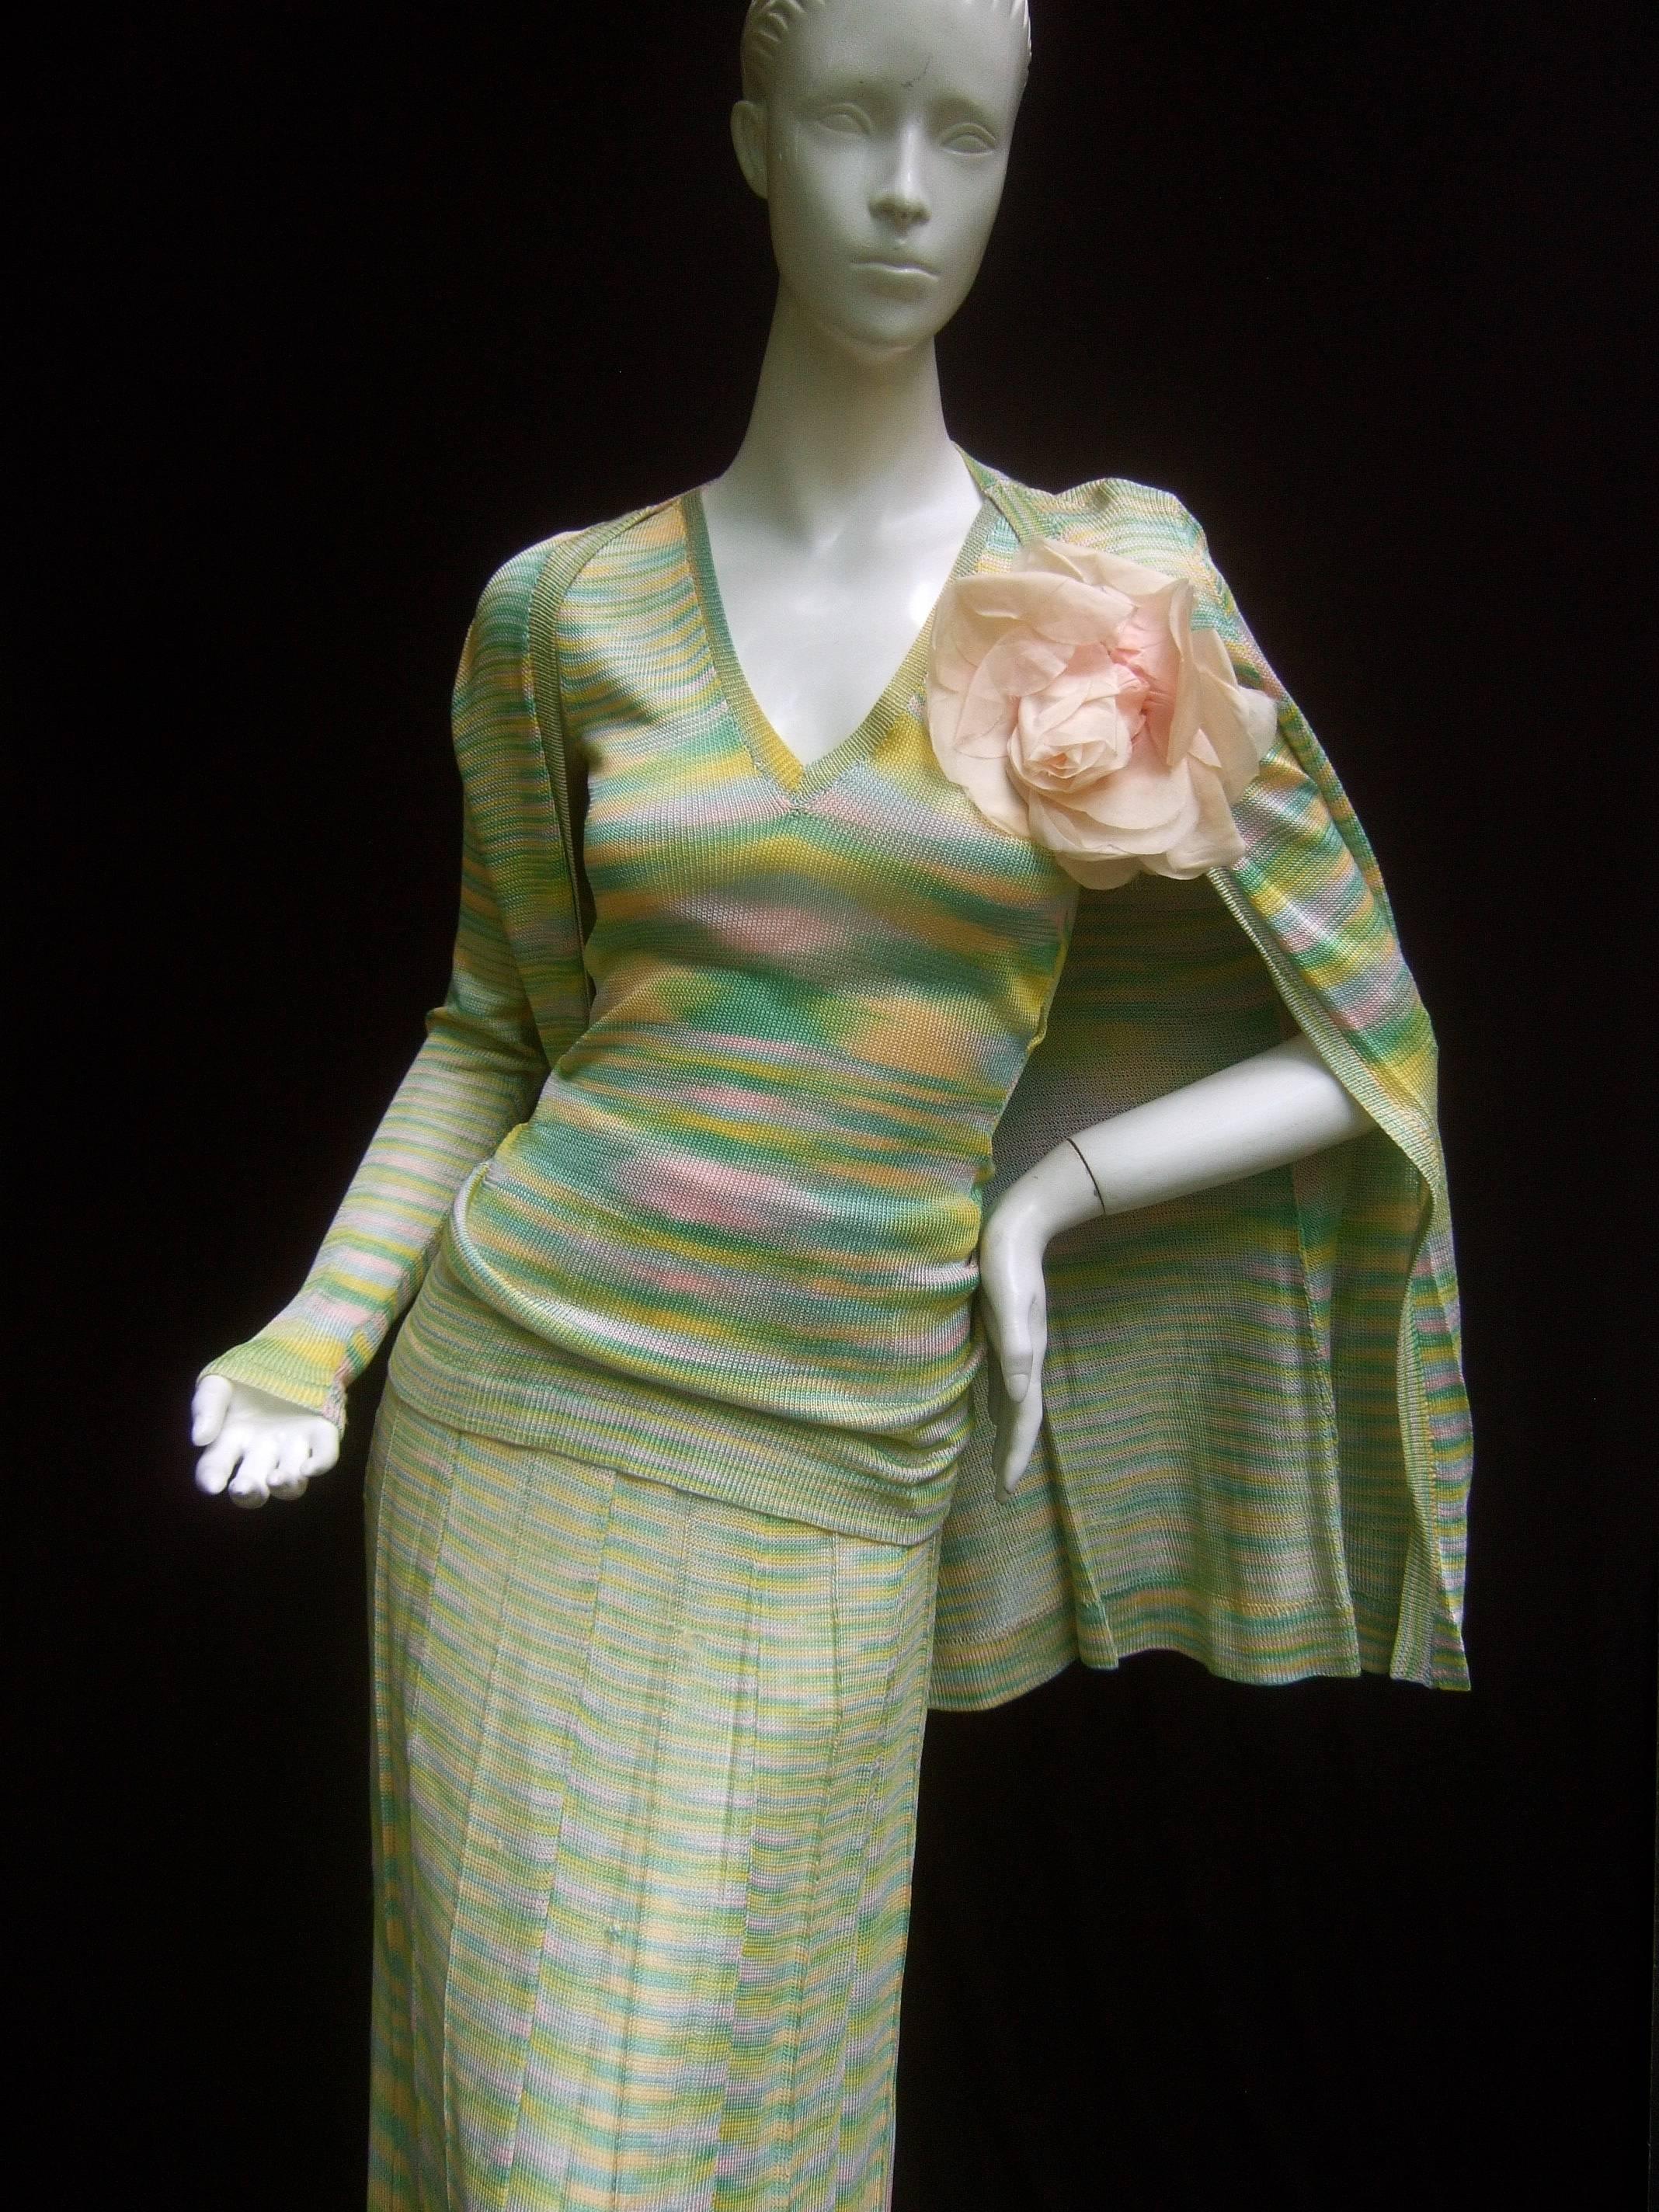 Adolfo Saks Fifth Avenue pastel knit ensemble c 1970s 
The stylish cotton knit ensemble is designed with a 
knit cardigan style sweater; paired with a knit shell
v knit tank top and long pleated maxi skirt 

The pastel knit cardigan is embellished